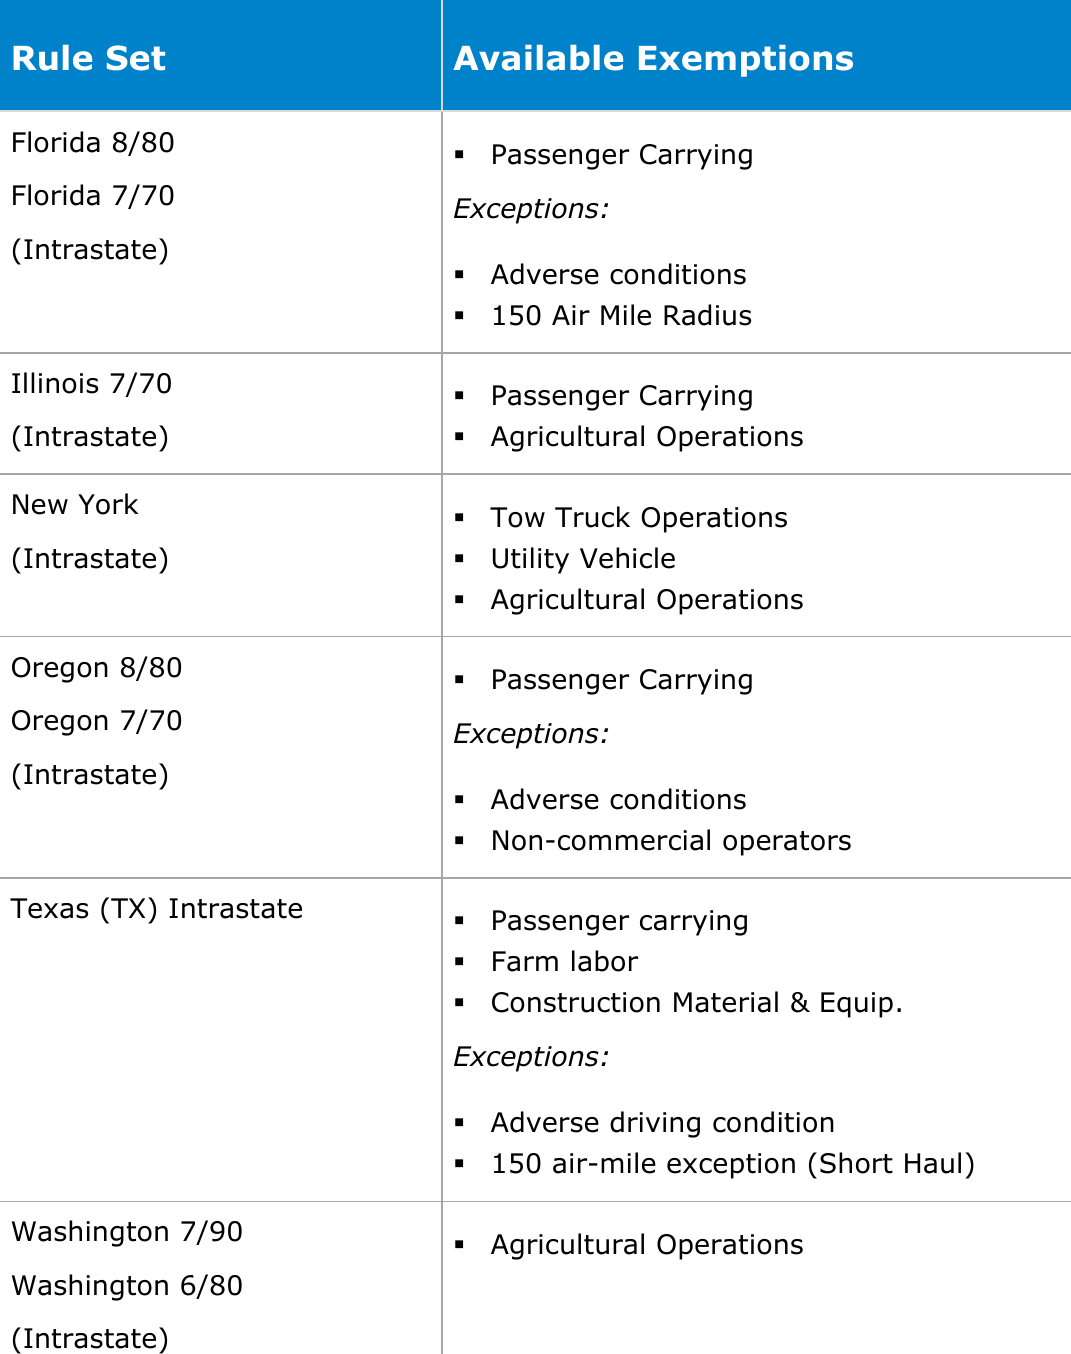  DriverConnect User Guide  88 © 2017, Rand McNally, Inc. Rule Set Available Exemptions Florida 8/80  Florida 7/70 (Intrastate)  Passenger Carrying Exceptions:  Adverse conditions  150 Air Mile Radius Illinois 7/70 (Intrastate)  Passenger Carrying  Agricultural Operations New York (Intrastate)  Tow Truck Operations  Utility Vehicle  Agricultural Operations Oregon 8/80  Oregon 7/70 (Intrastate)  Passenger Carrying Exceptions:  Adverse conditions   Non-commercial operators Texas (TX) Intrastate  Passenger carrying  Farm labor  Construction Material &amp; Equip. Exceptions:  Adverse driving condition  150 air-mile exception (Short Haul) Washington 7/90 Washington 6/80 (Intrastate)  Agricultural Operations 